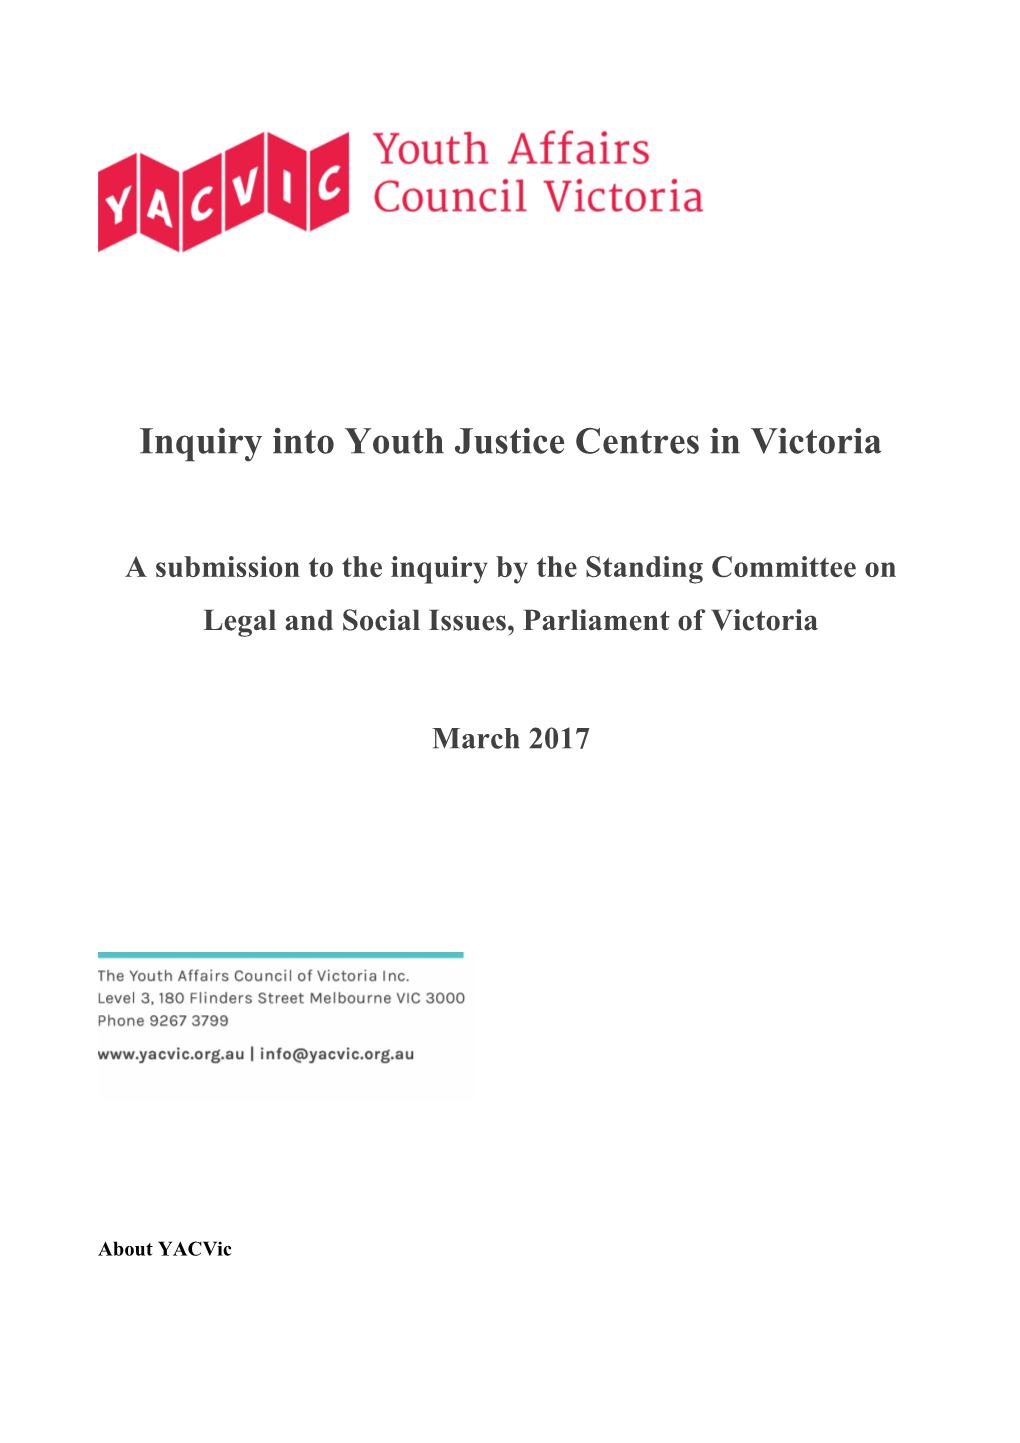 Inquiry Into Youth Justice Centres in Victoria